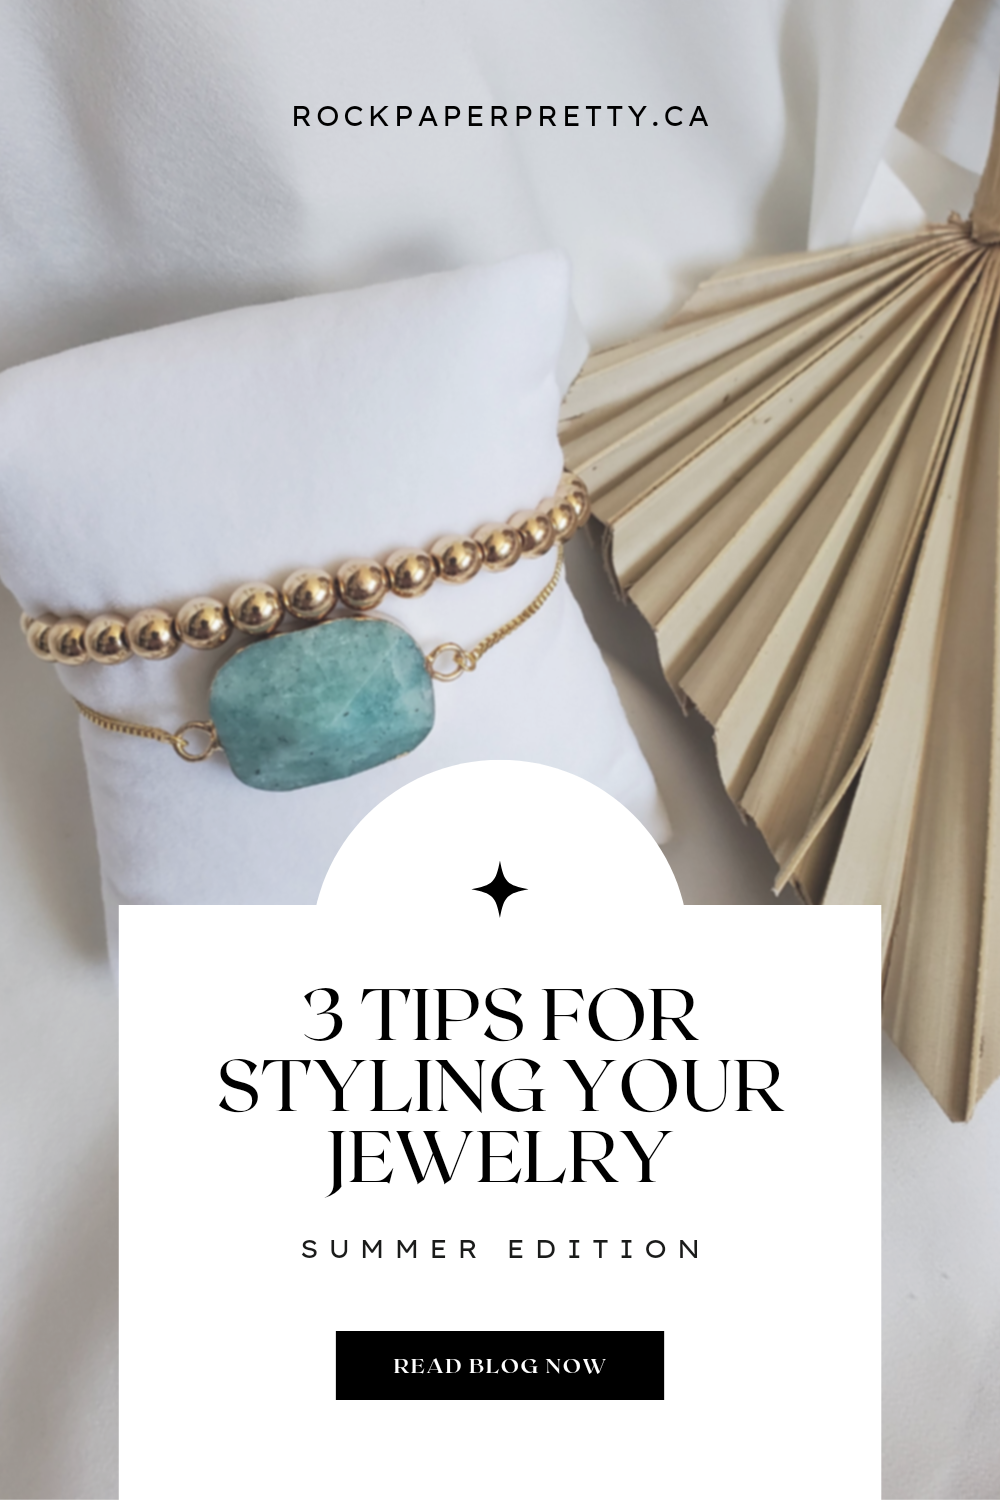 3 Tips for Styling Your Jewelry for Summer